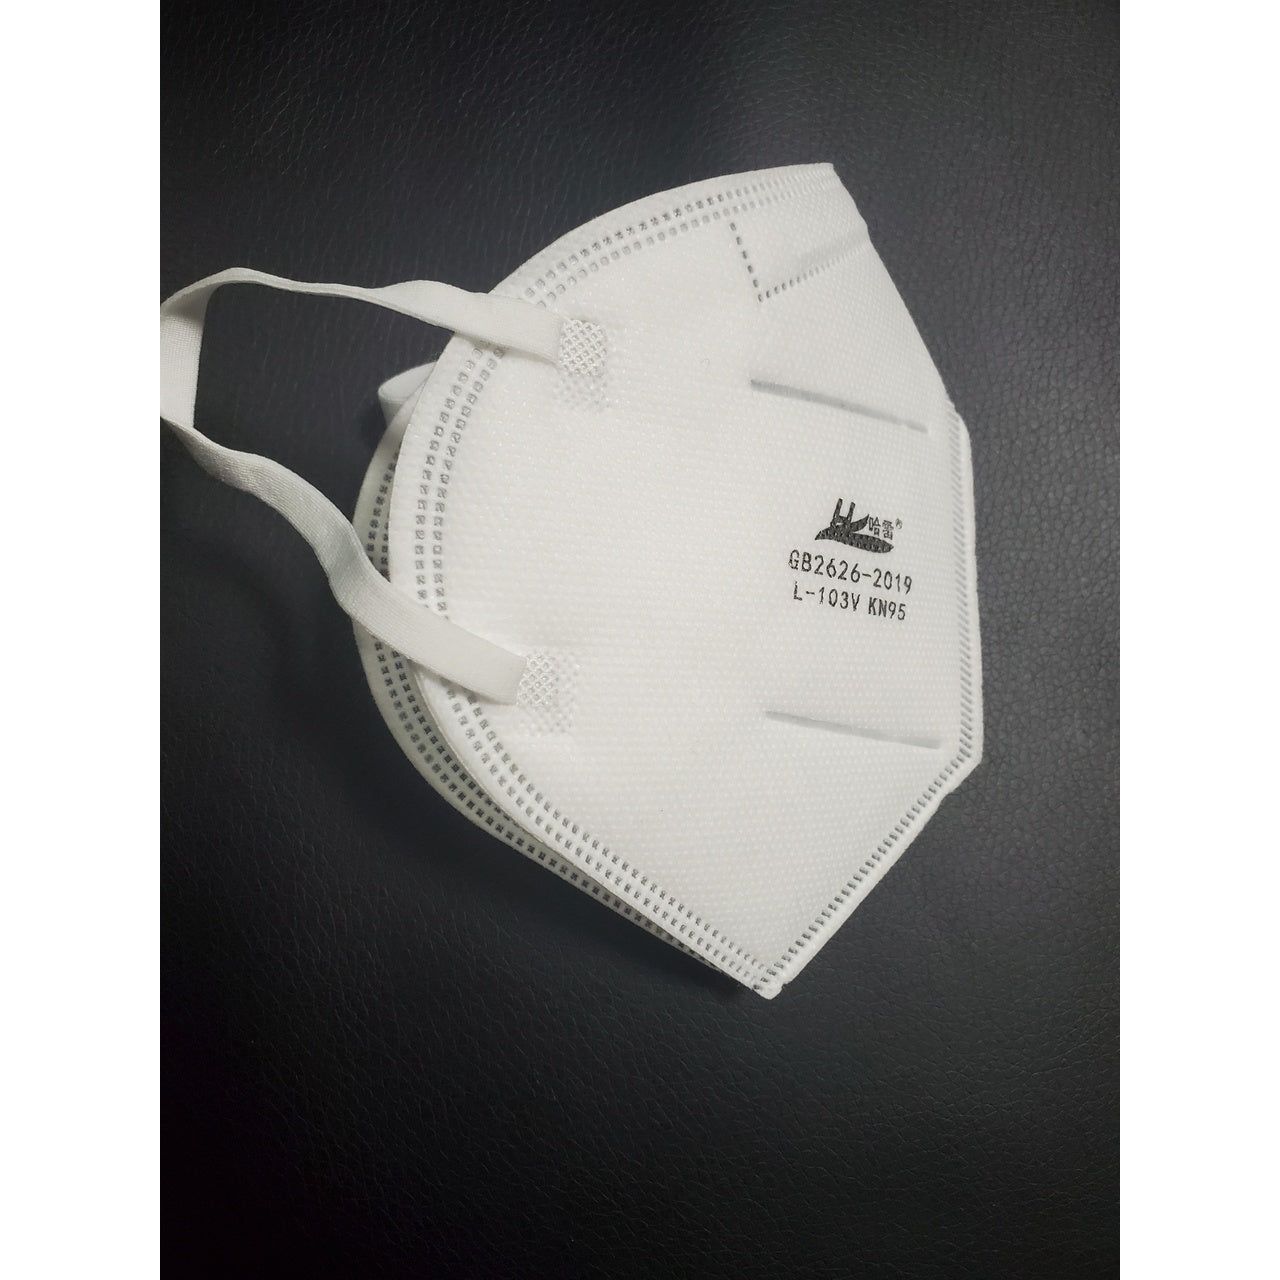 Side view of white Powecom KN95 face mask laid flat